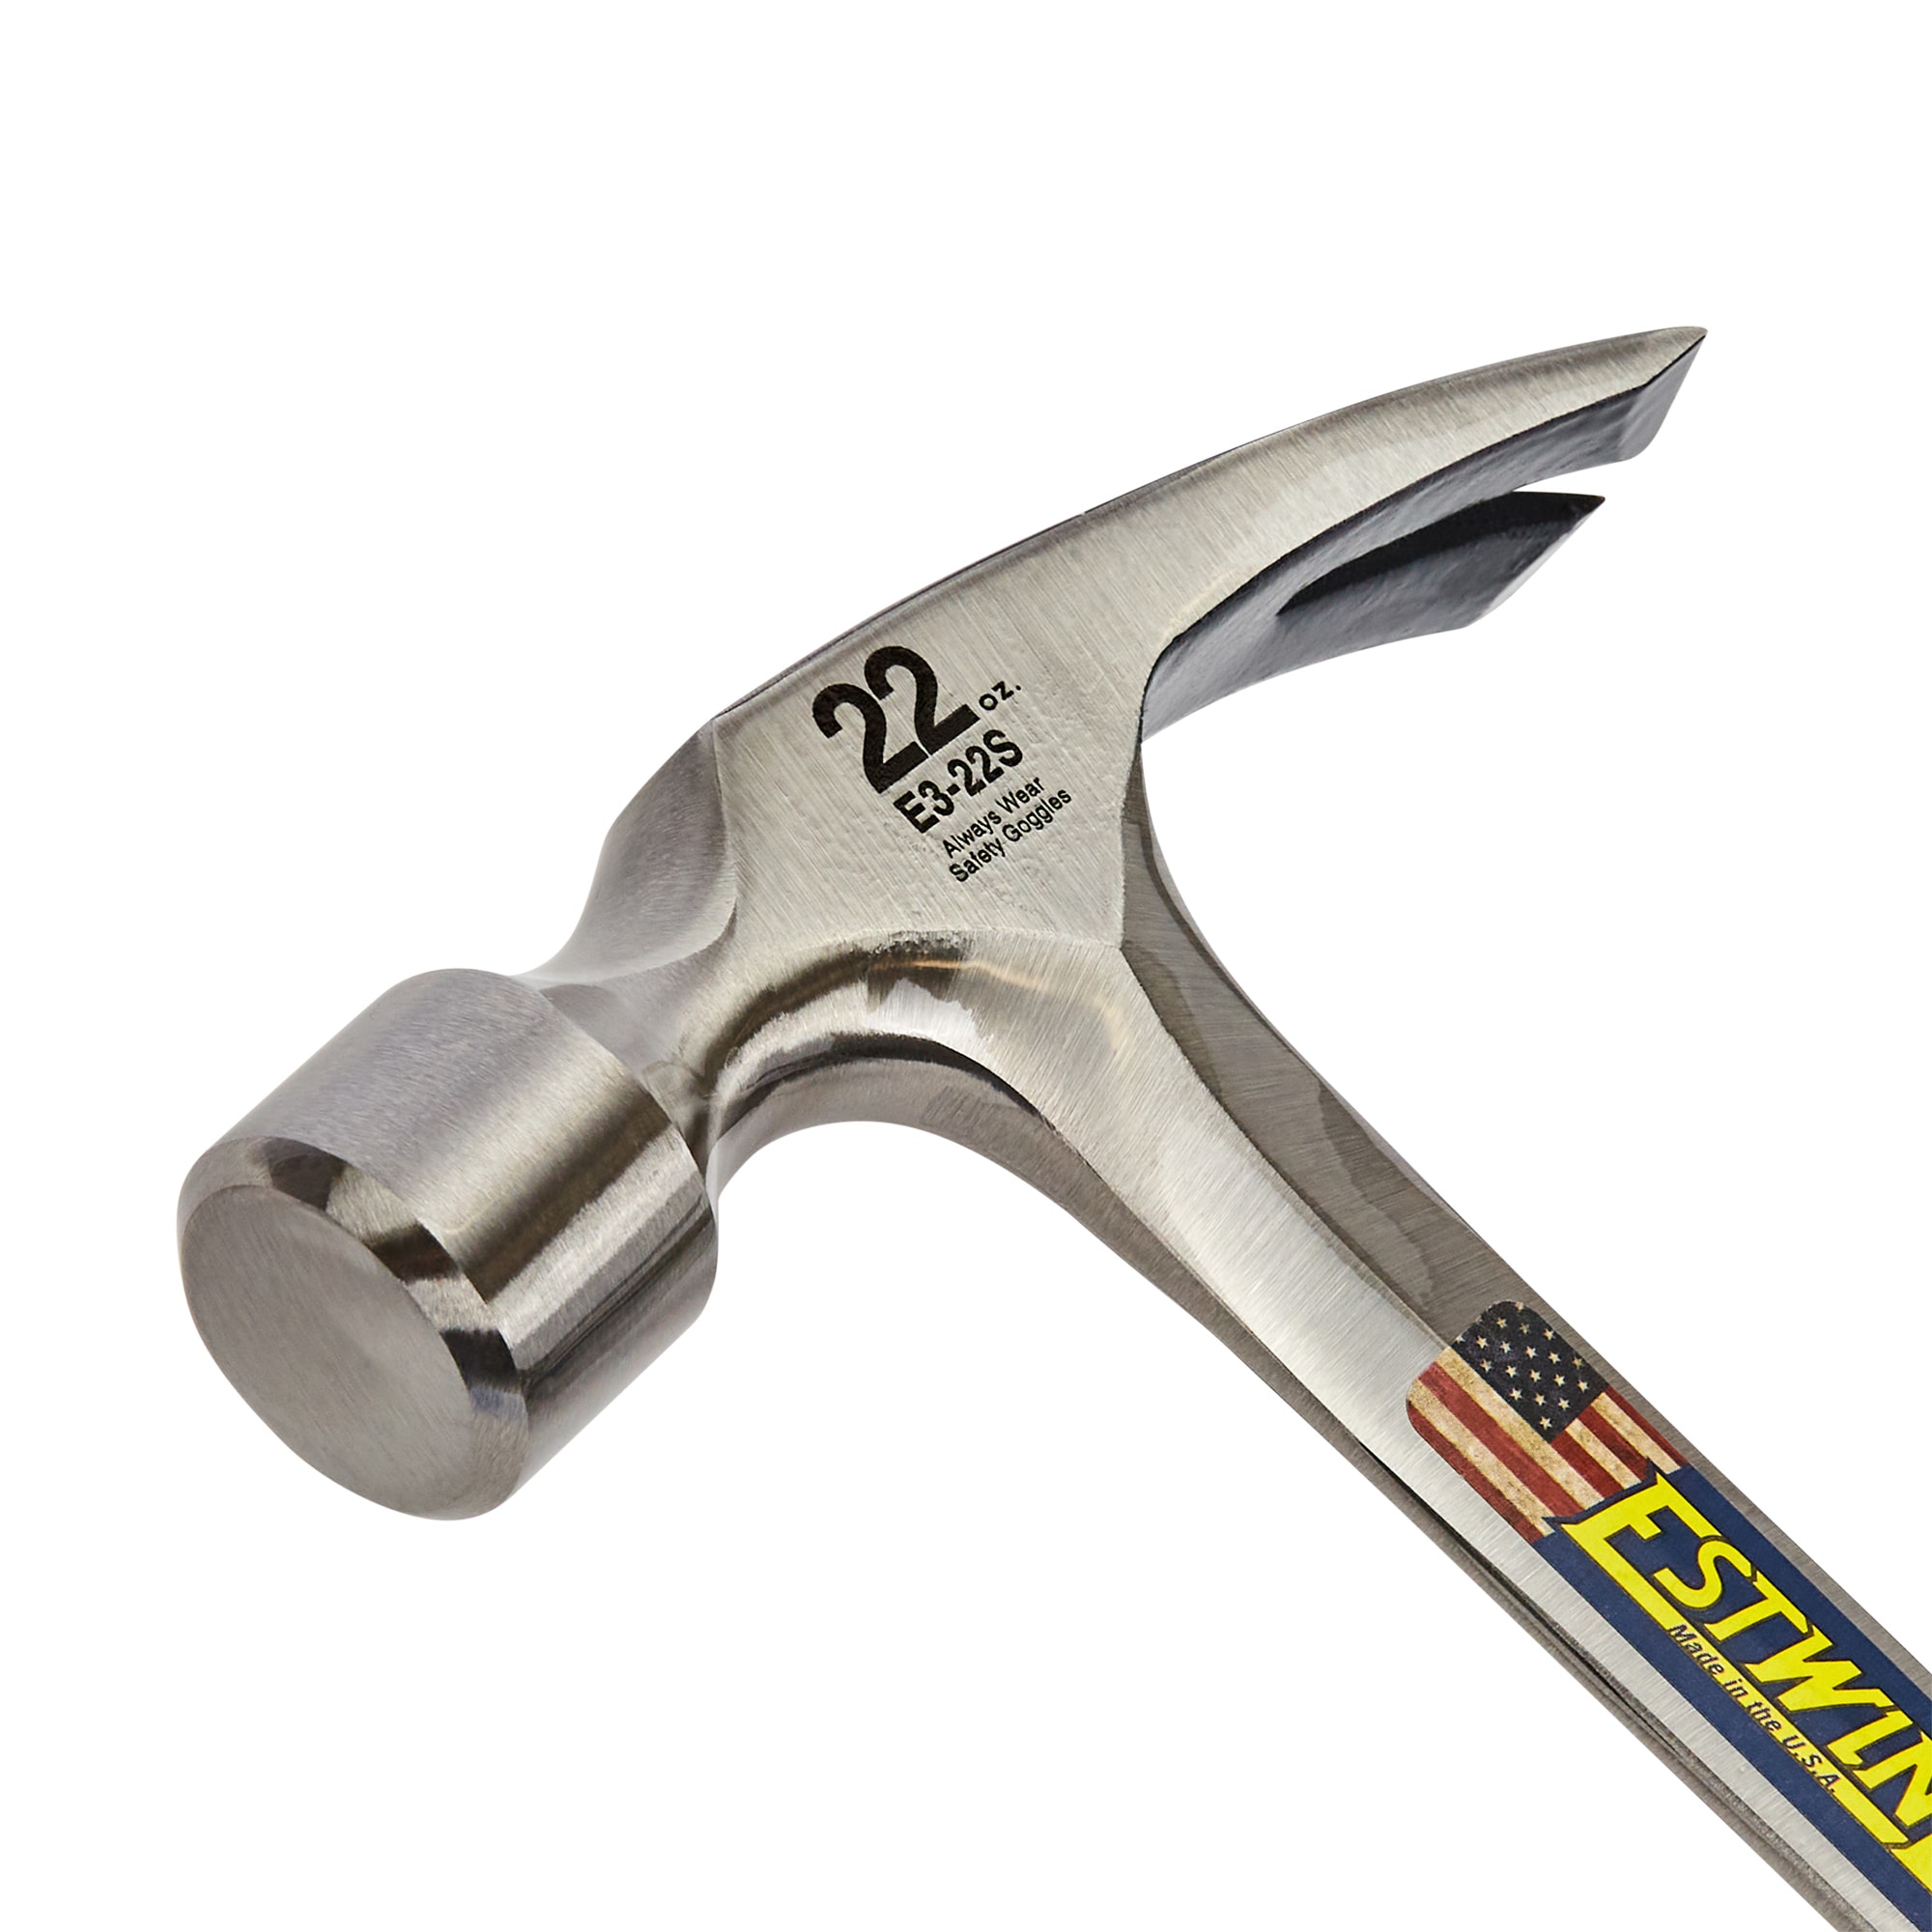 Estwing Estwing Framing Hammer 22 oz Straight Rip Claw with Smooth Face & Shock Grip 